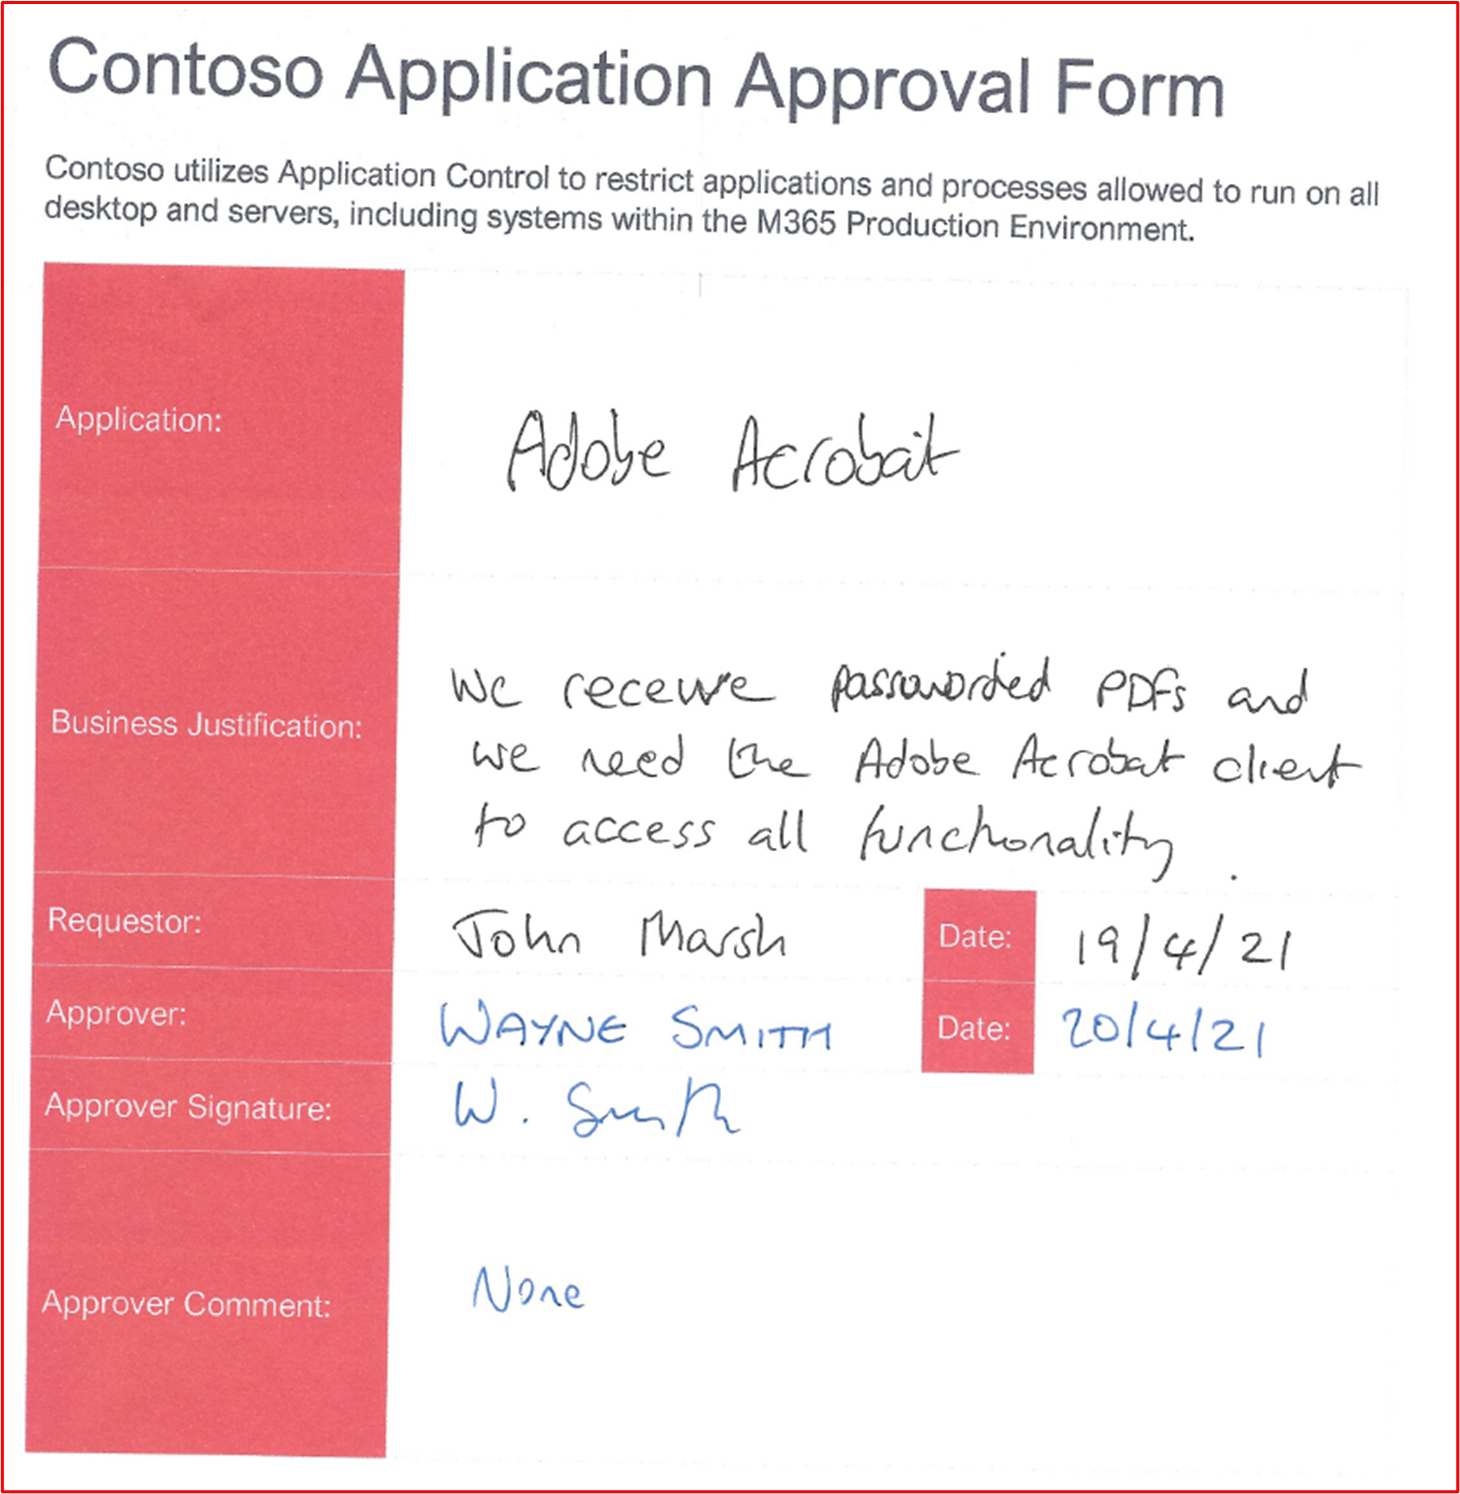 screenshot demonstrate an approval by management that each application permitted to run within the environment follows an approval process.